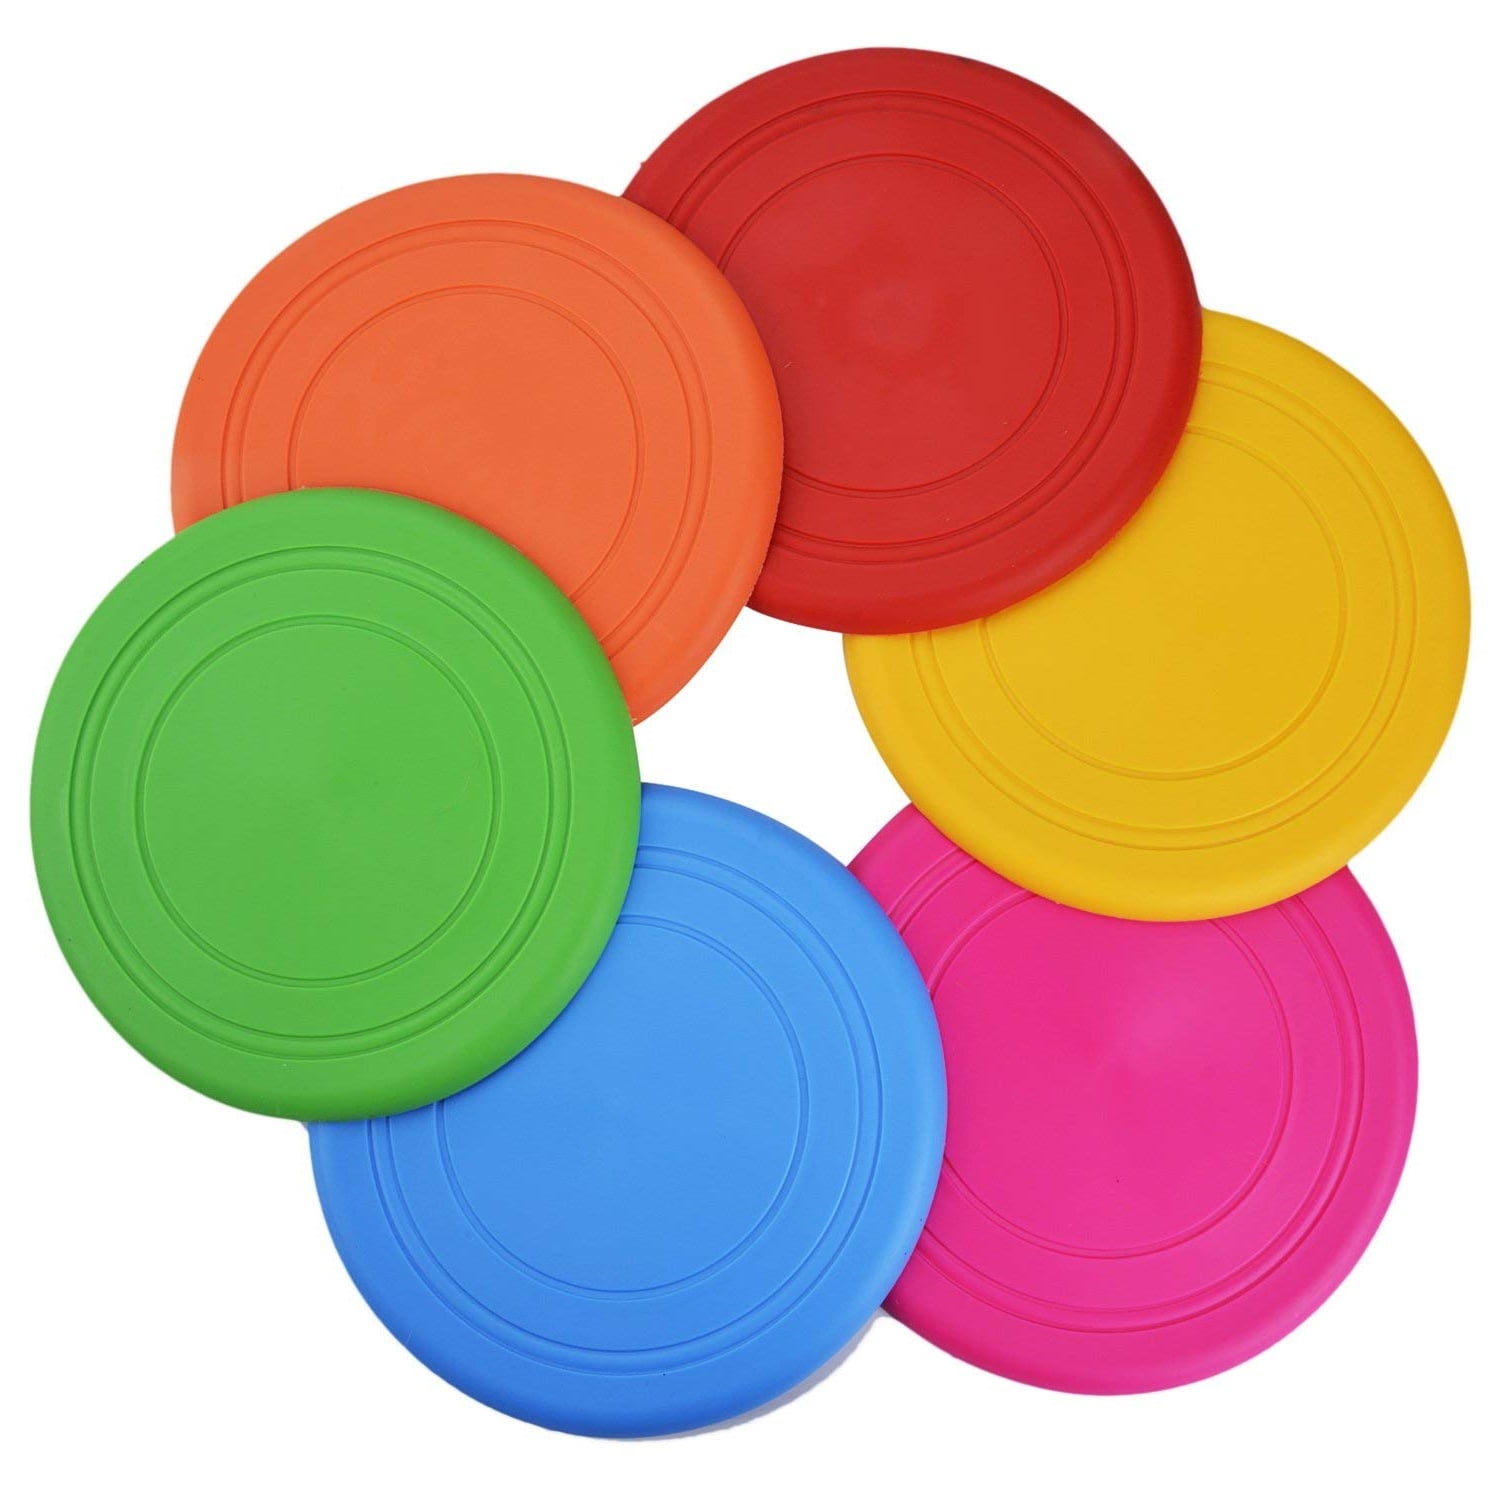 Silicone Pet Dog Flying Saucer Disc Toy for Exercise Training Tool OK 